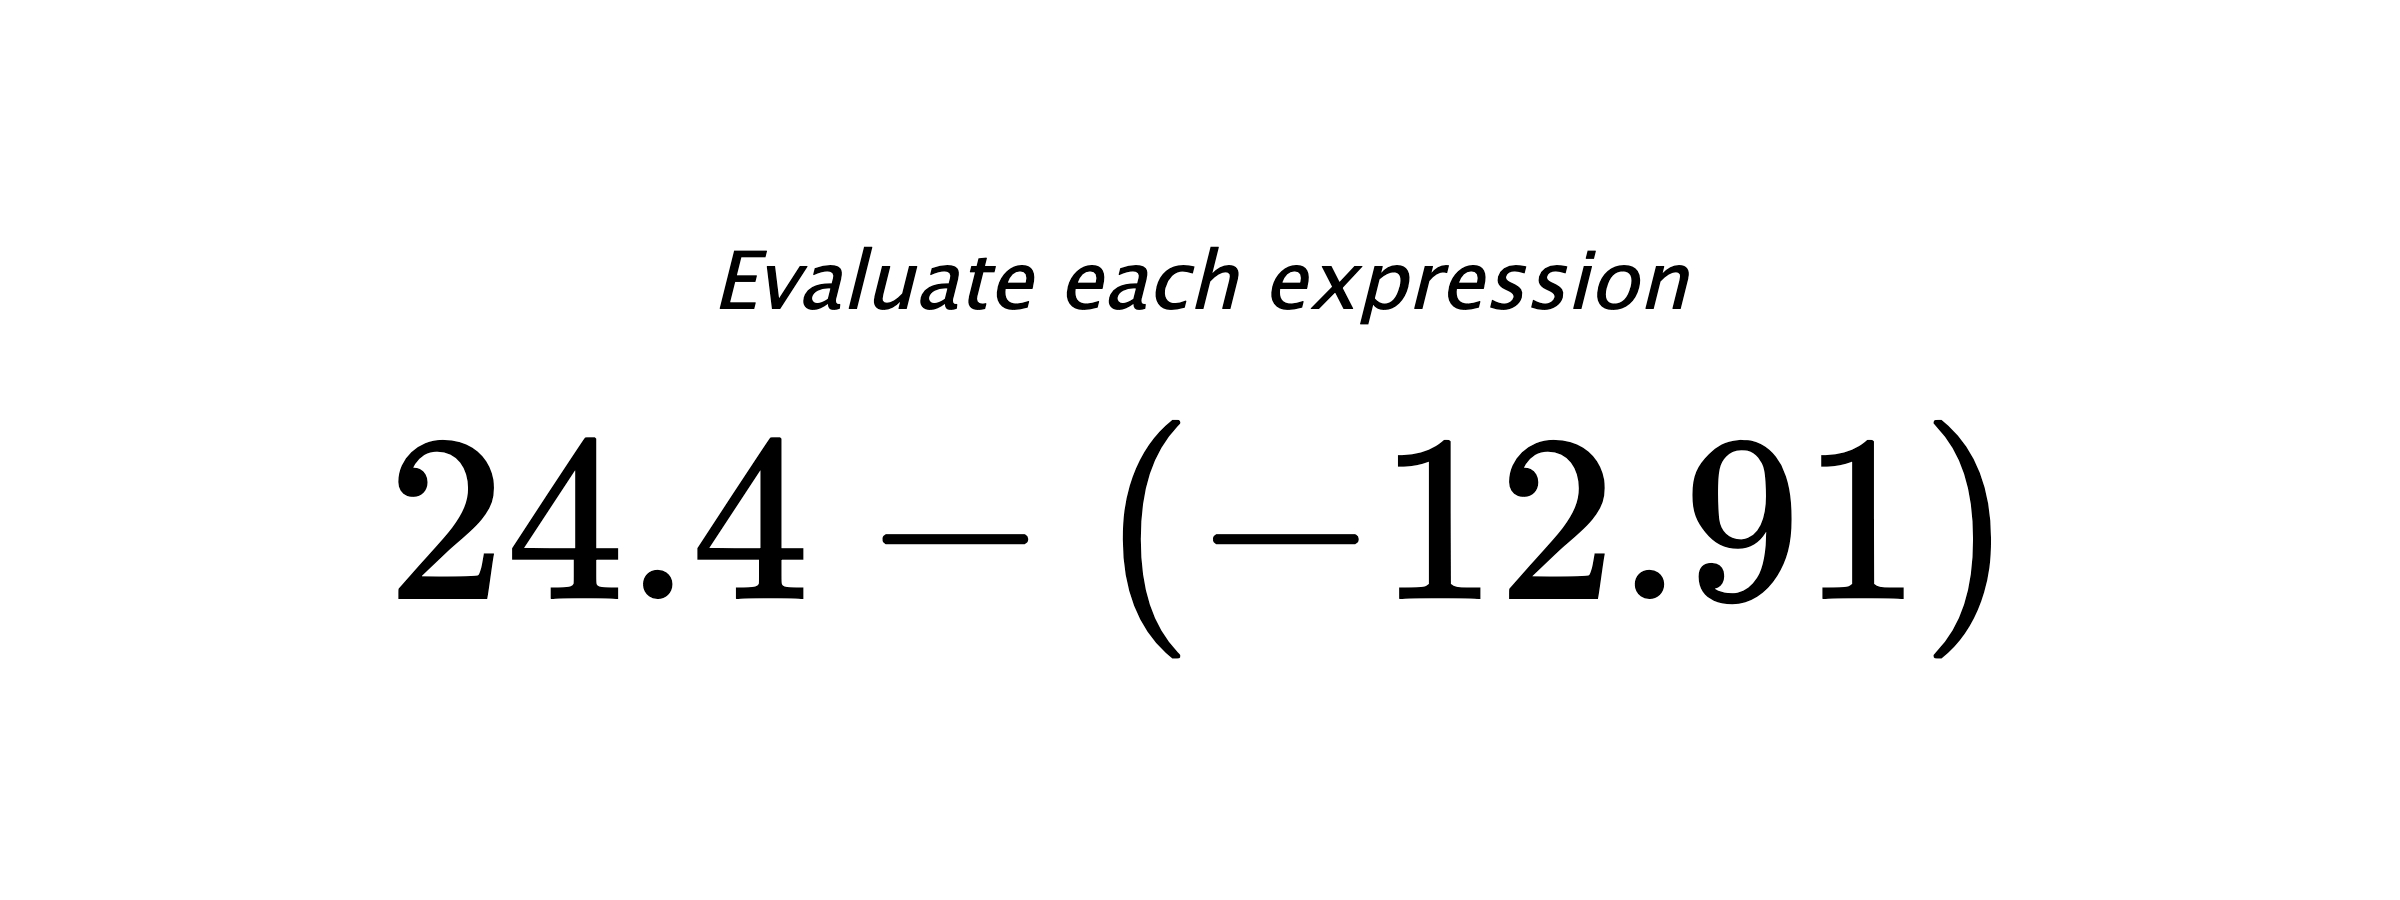 Evaluate each expression $ 24.4-(-12.91) $